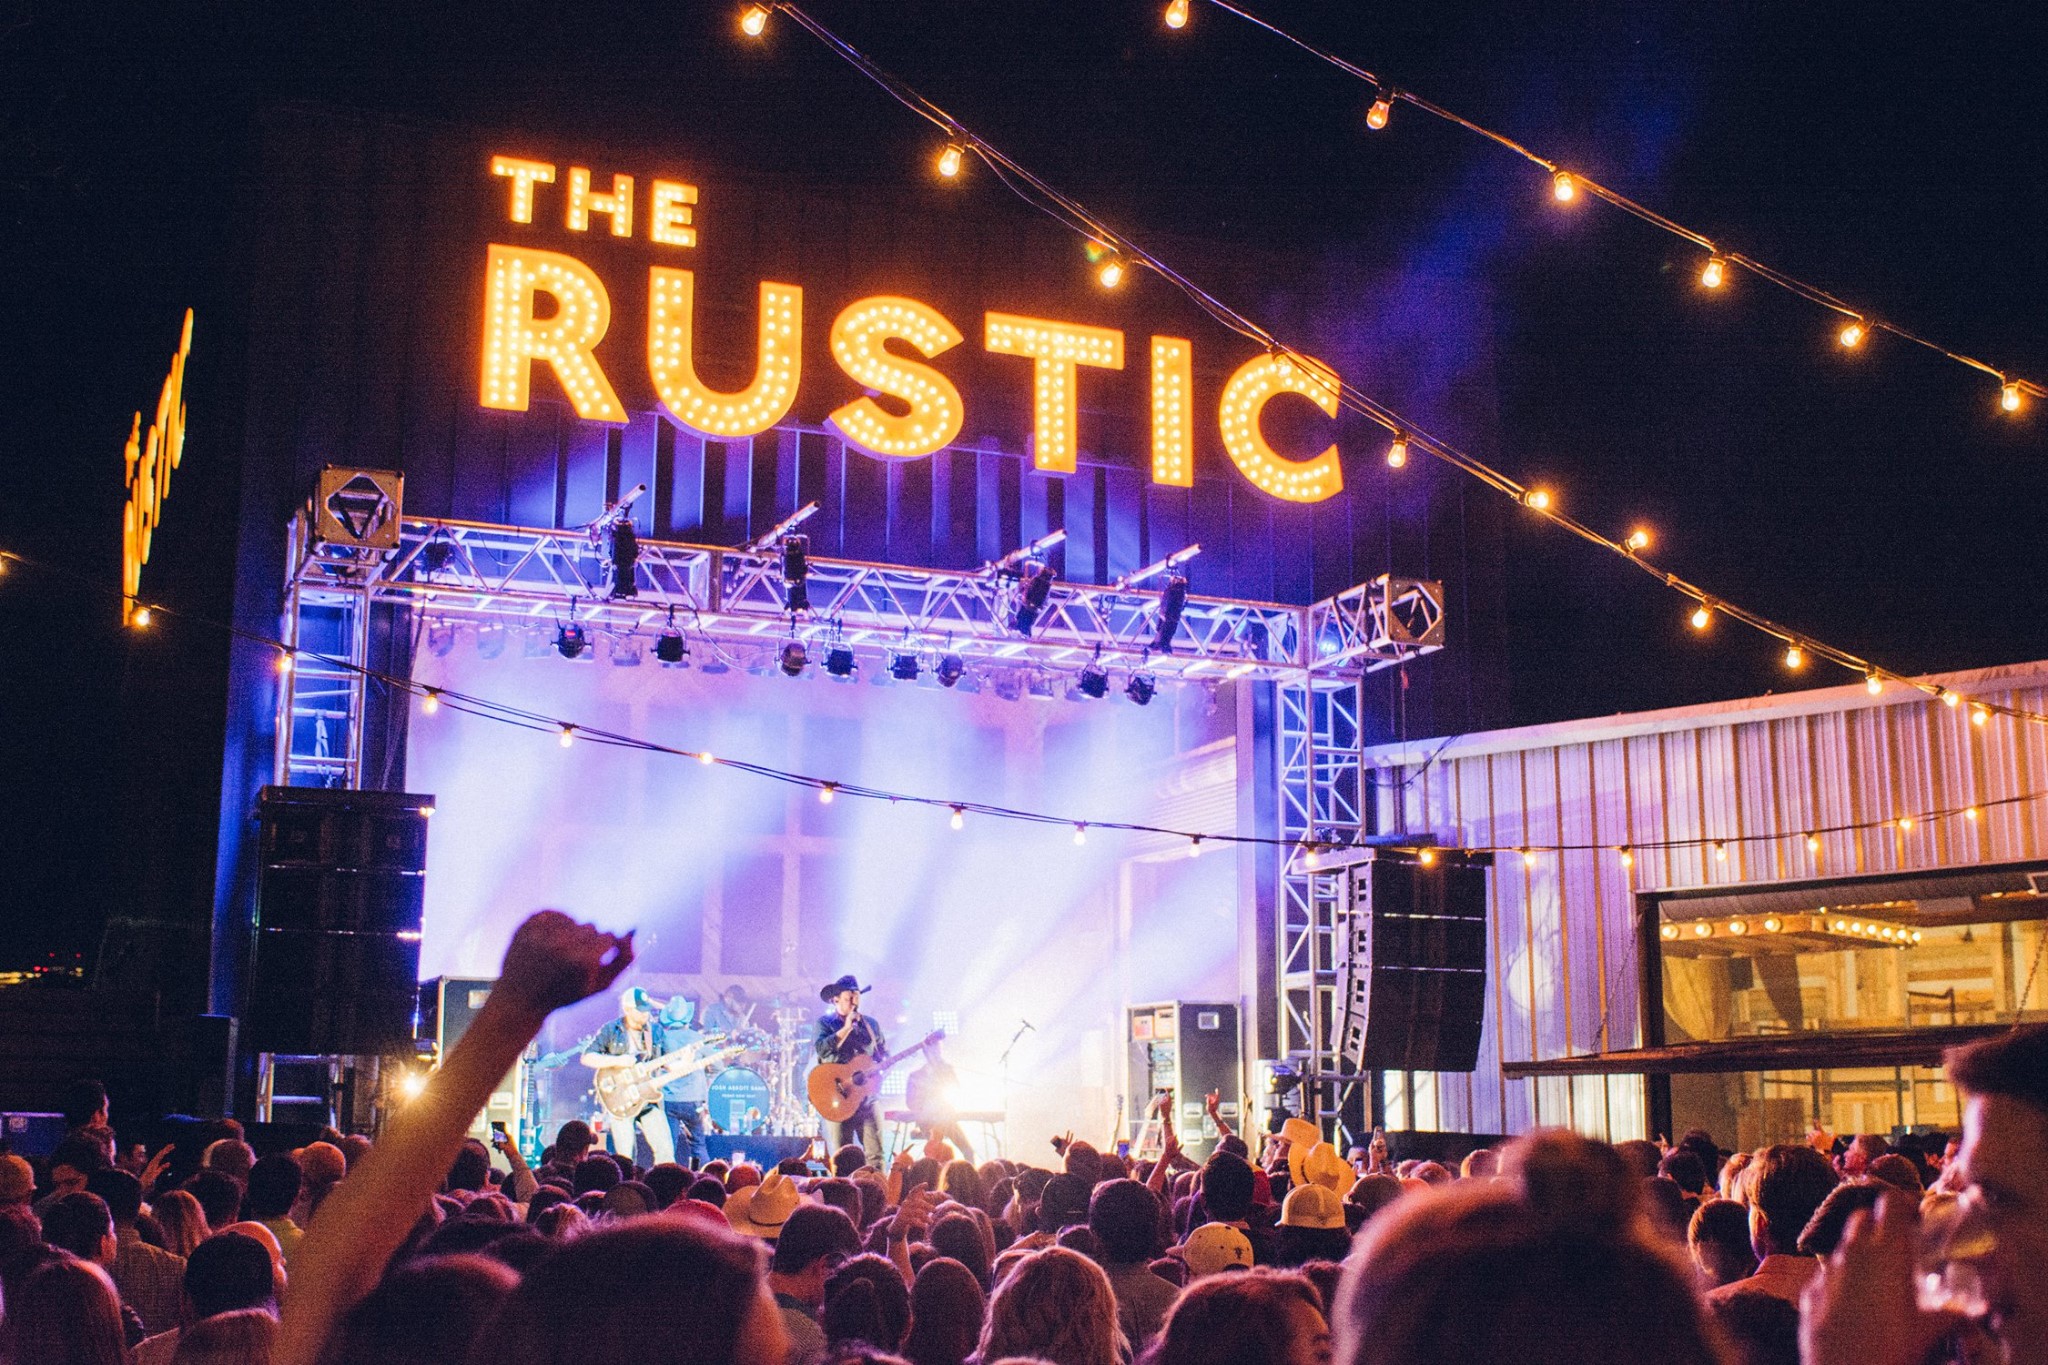 MUSIC+EVENTS - The Rustic